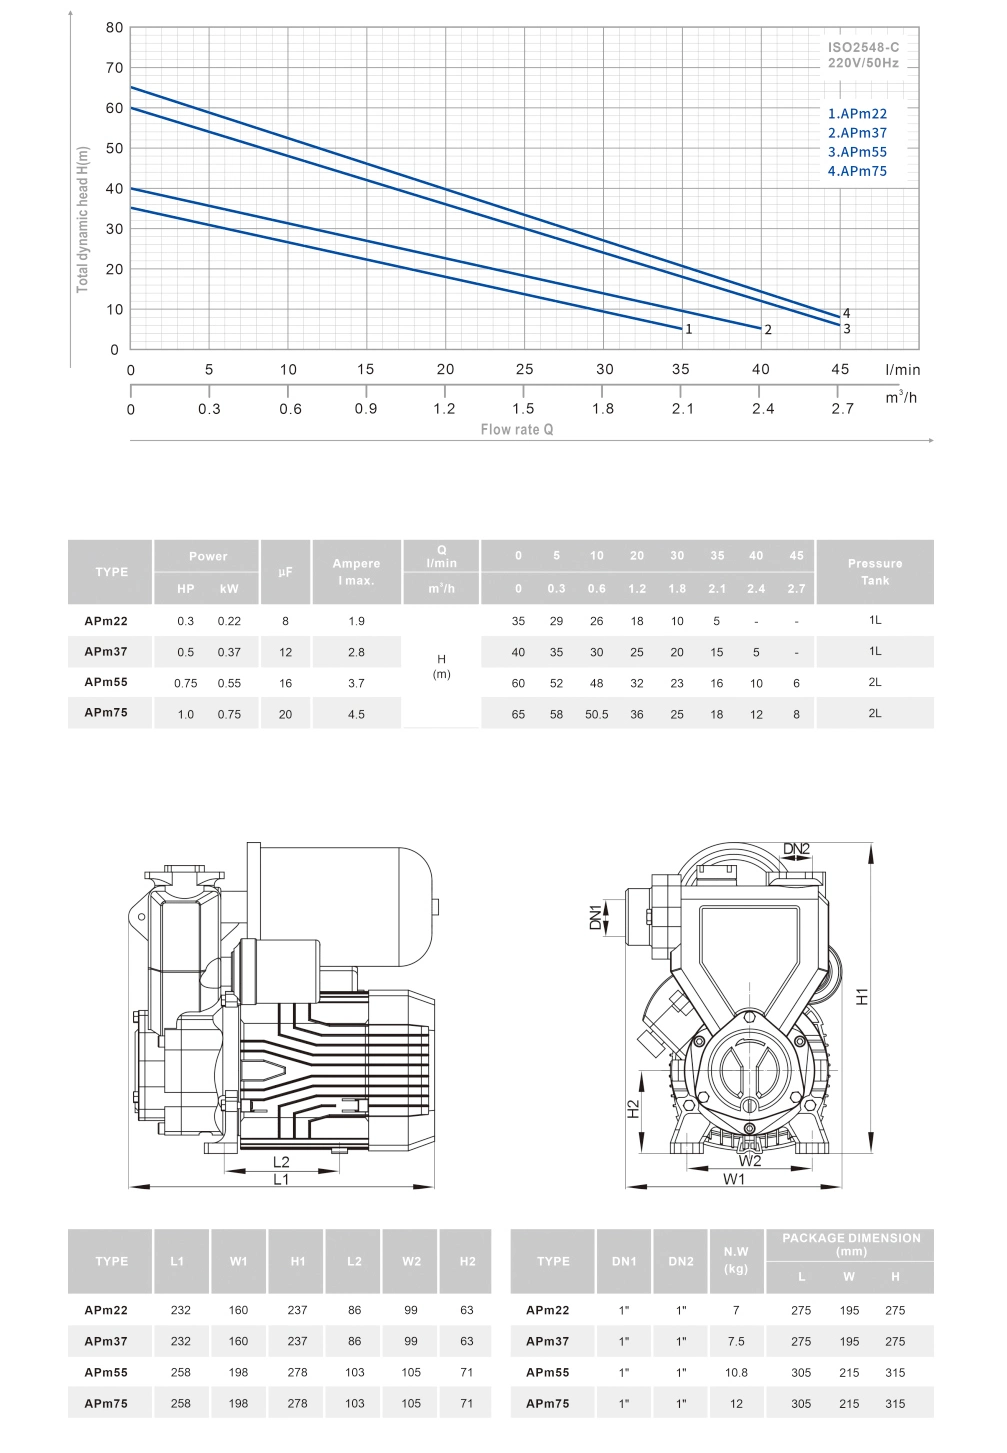 Yinjia New Design 0.37HP Automatic Self-Priming Pressure Peripheral Water Pump for Booster